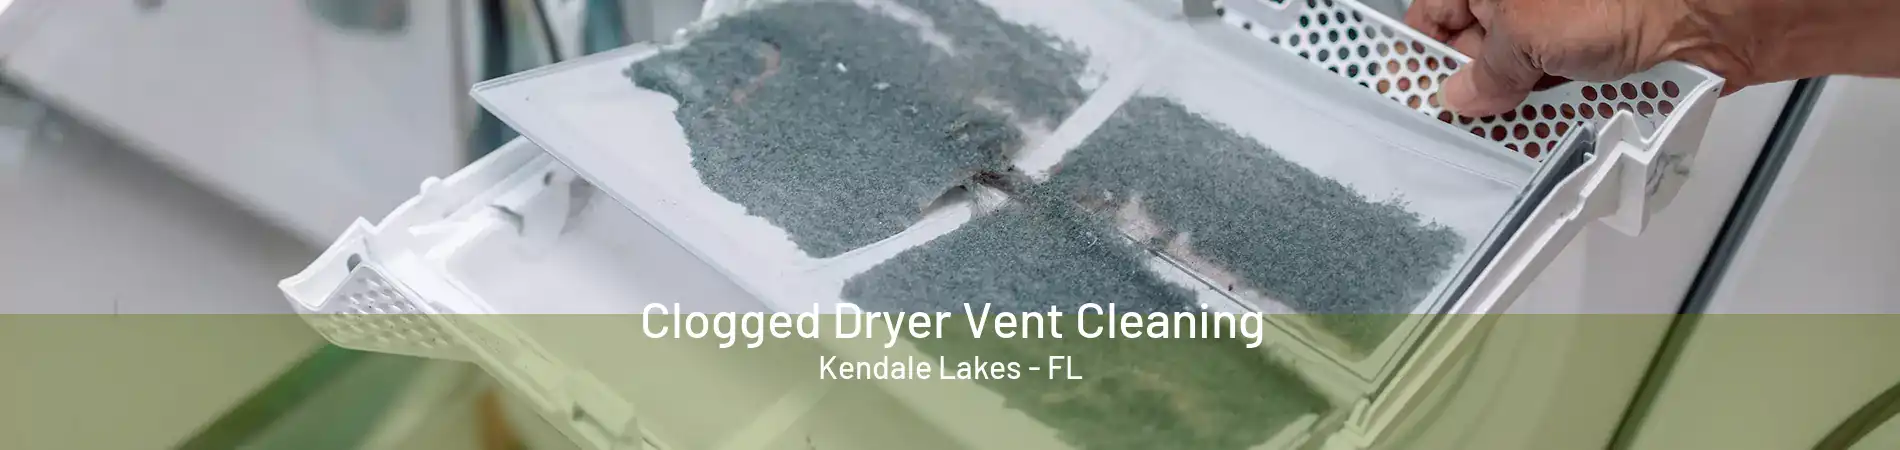 Clogged Dryer Vent Cleaning Kendale Lakes - FL